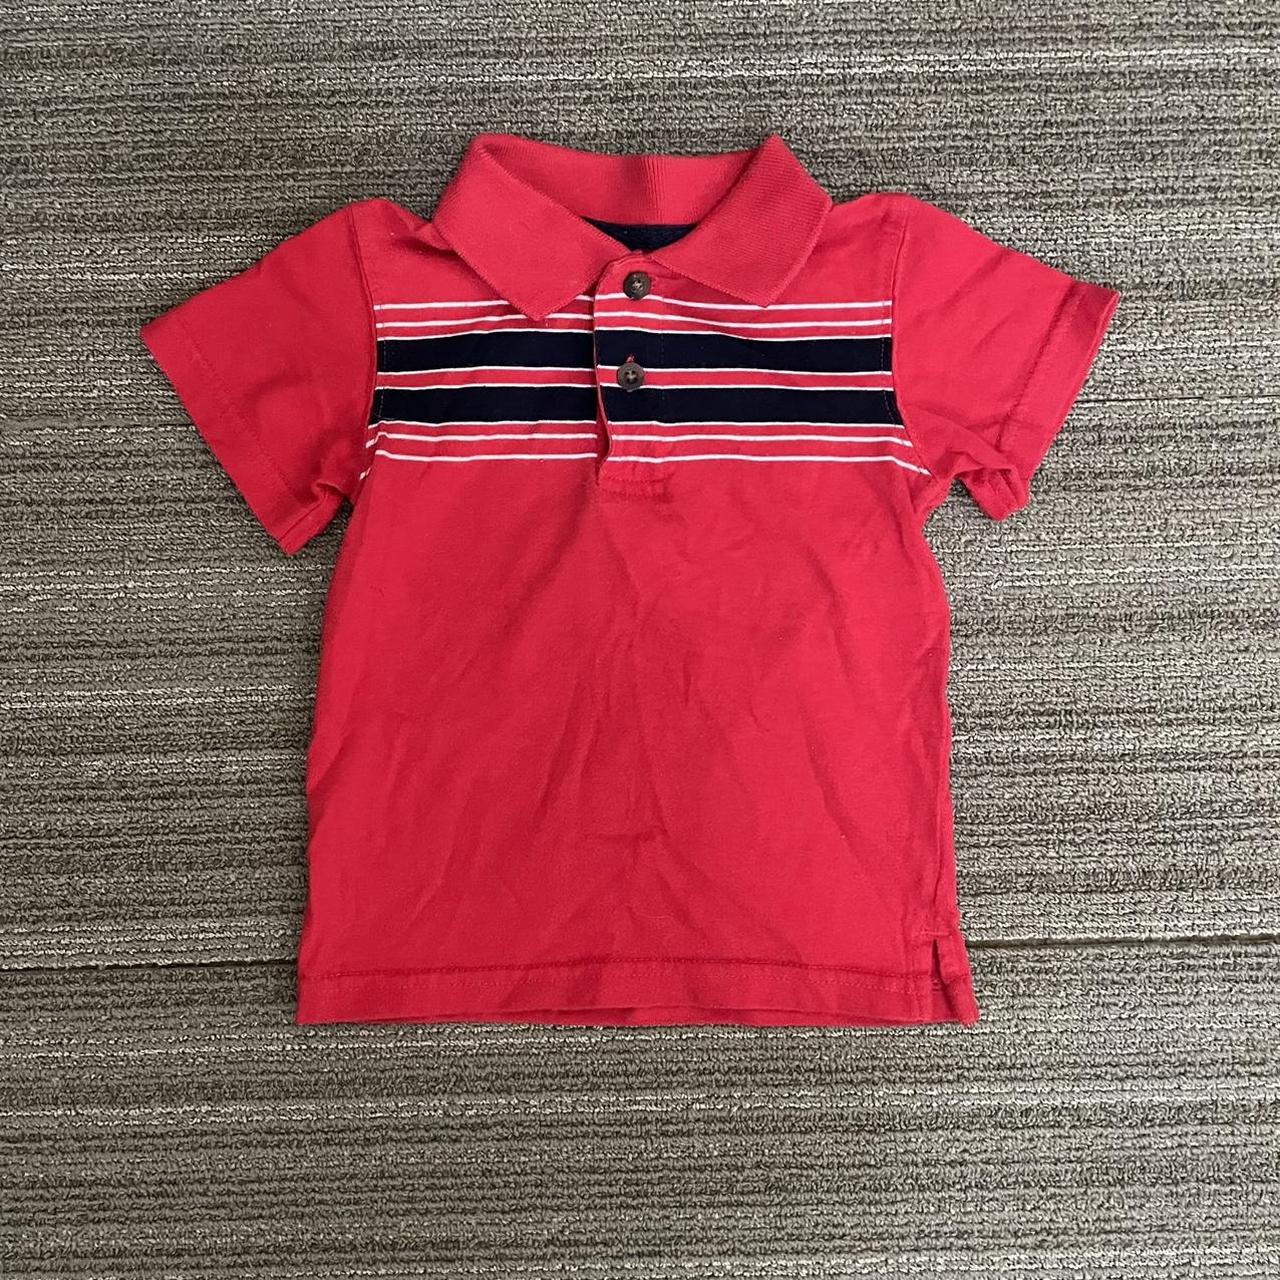 Product Image 1 - Boys Collared Shirt
•Size 18 months